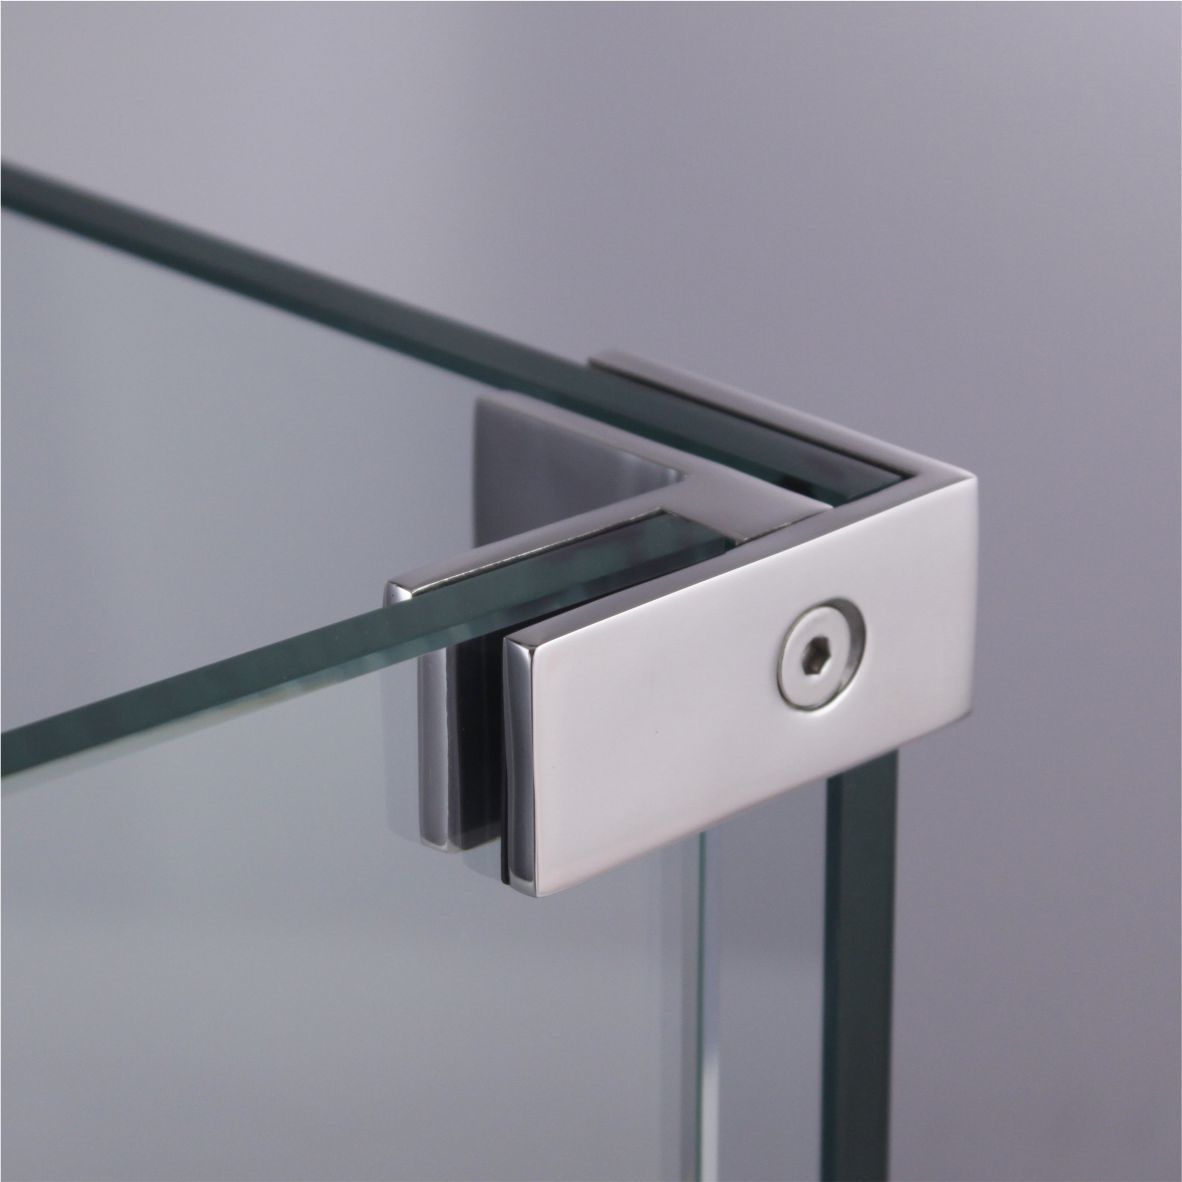 Balustrading Support Brackets & Clamps for house